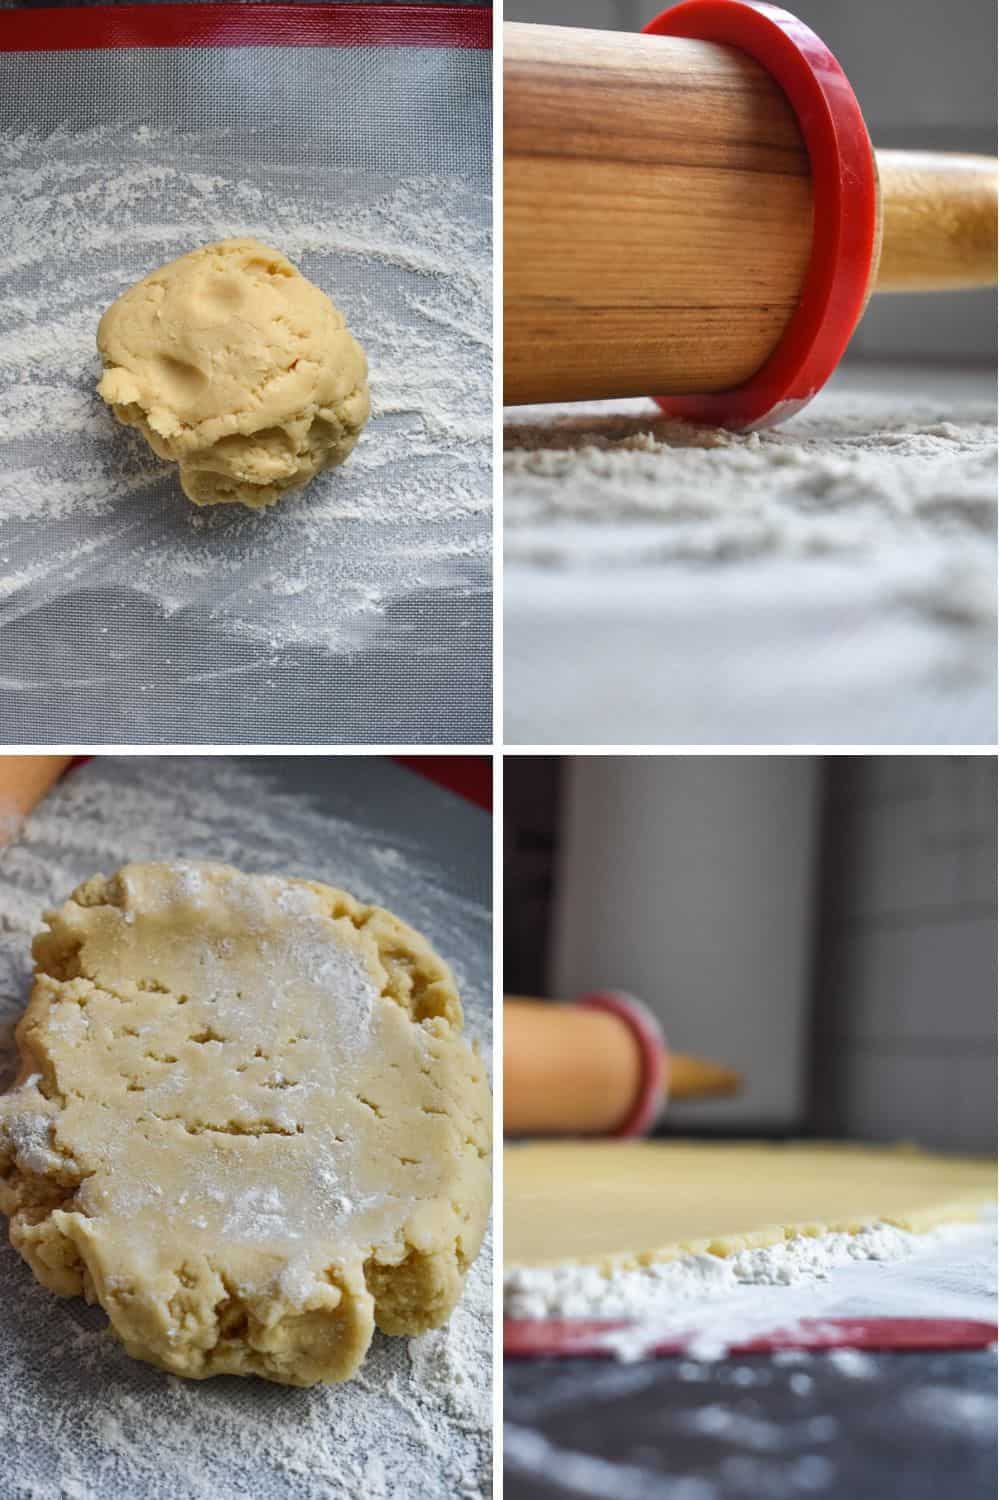 Four photo collage showing the process of rolling out dough